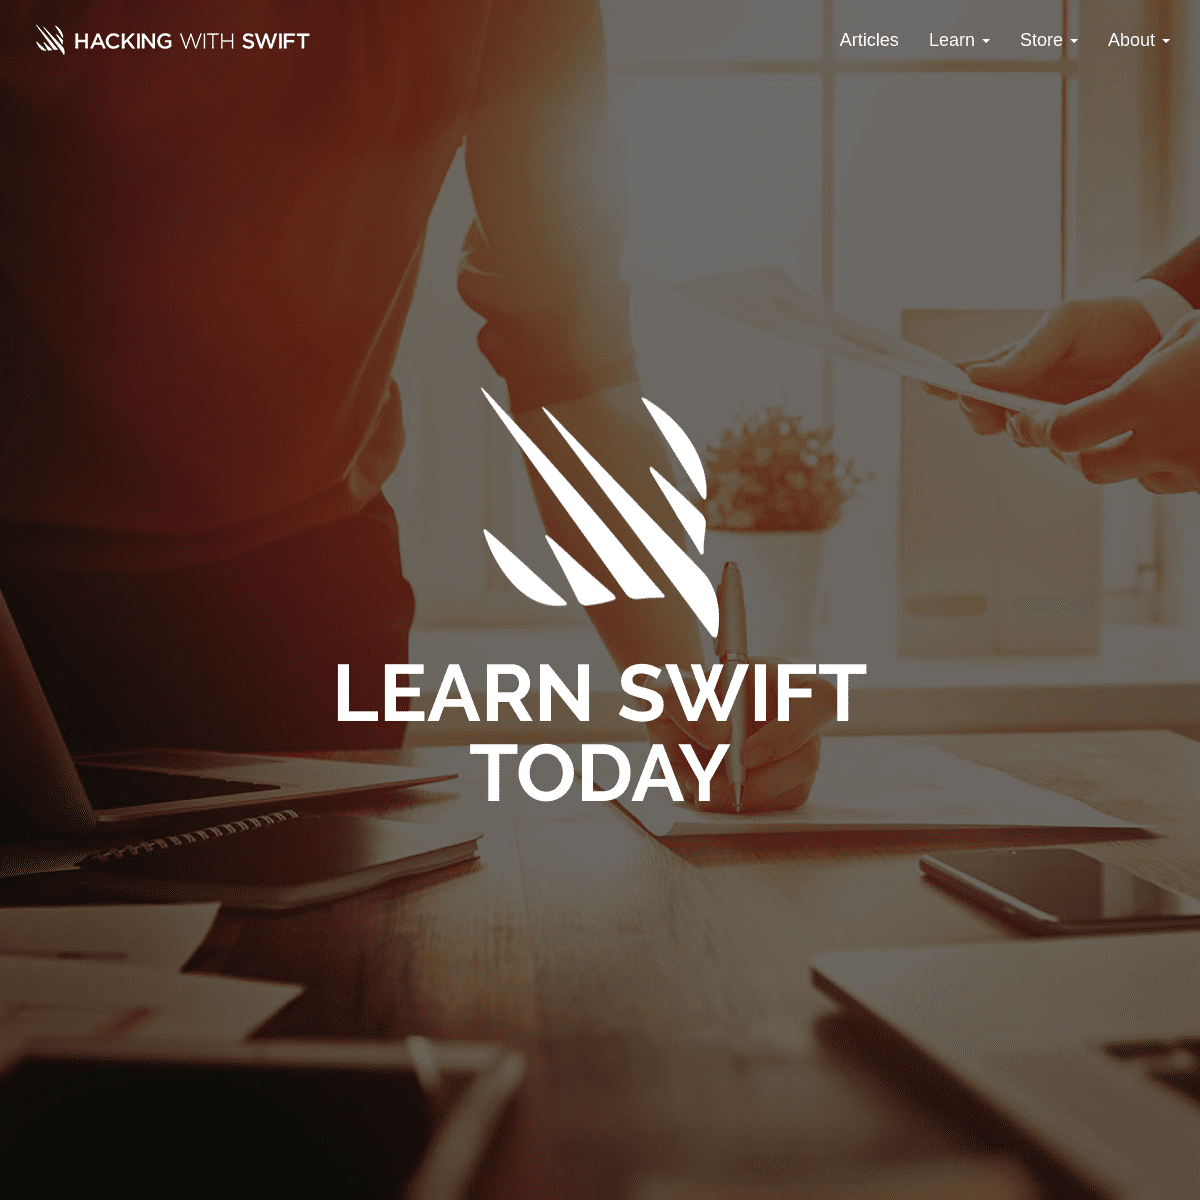 Hacking with Swift – learn to code iPhone and iPad apps with free Swift 5.0 tutorials